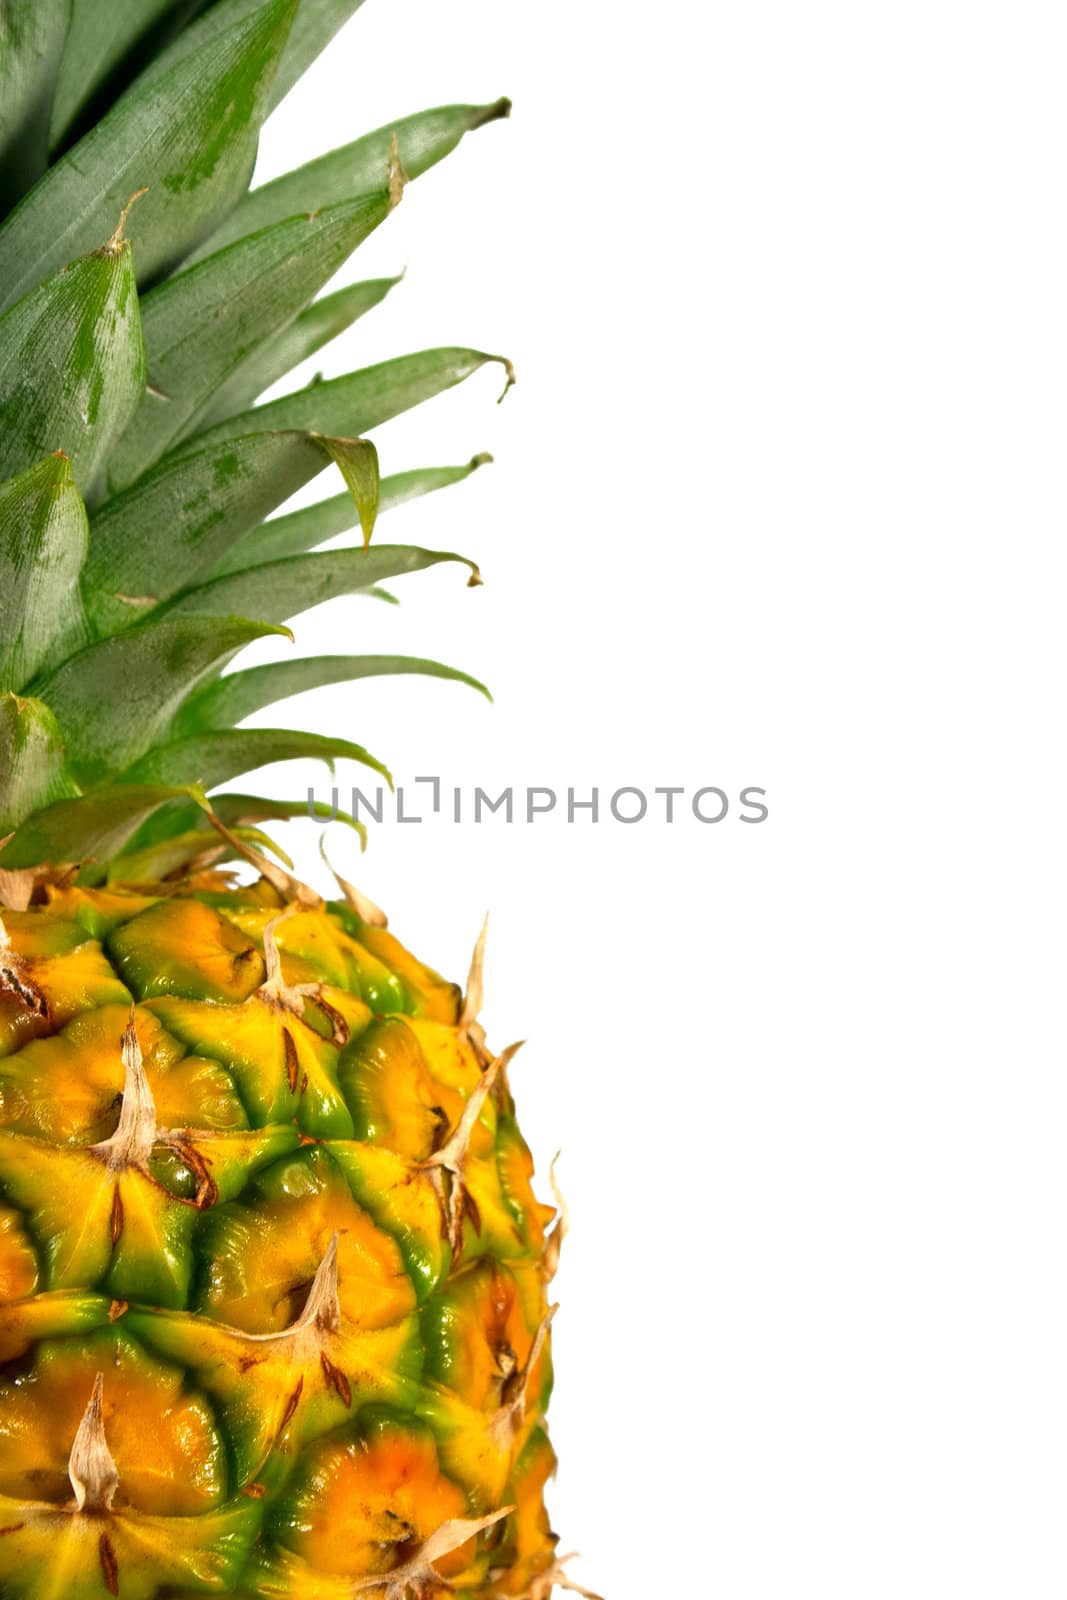 Closep up Pineapple on white background